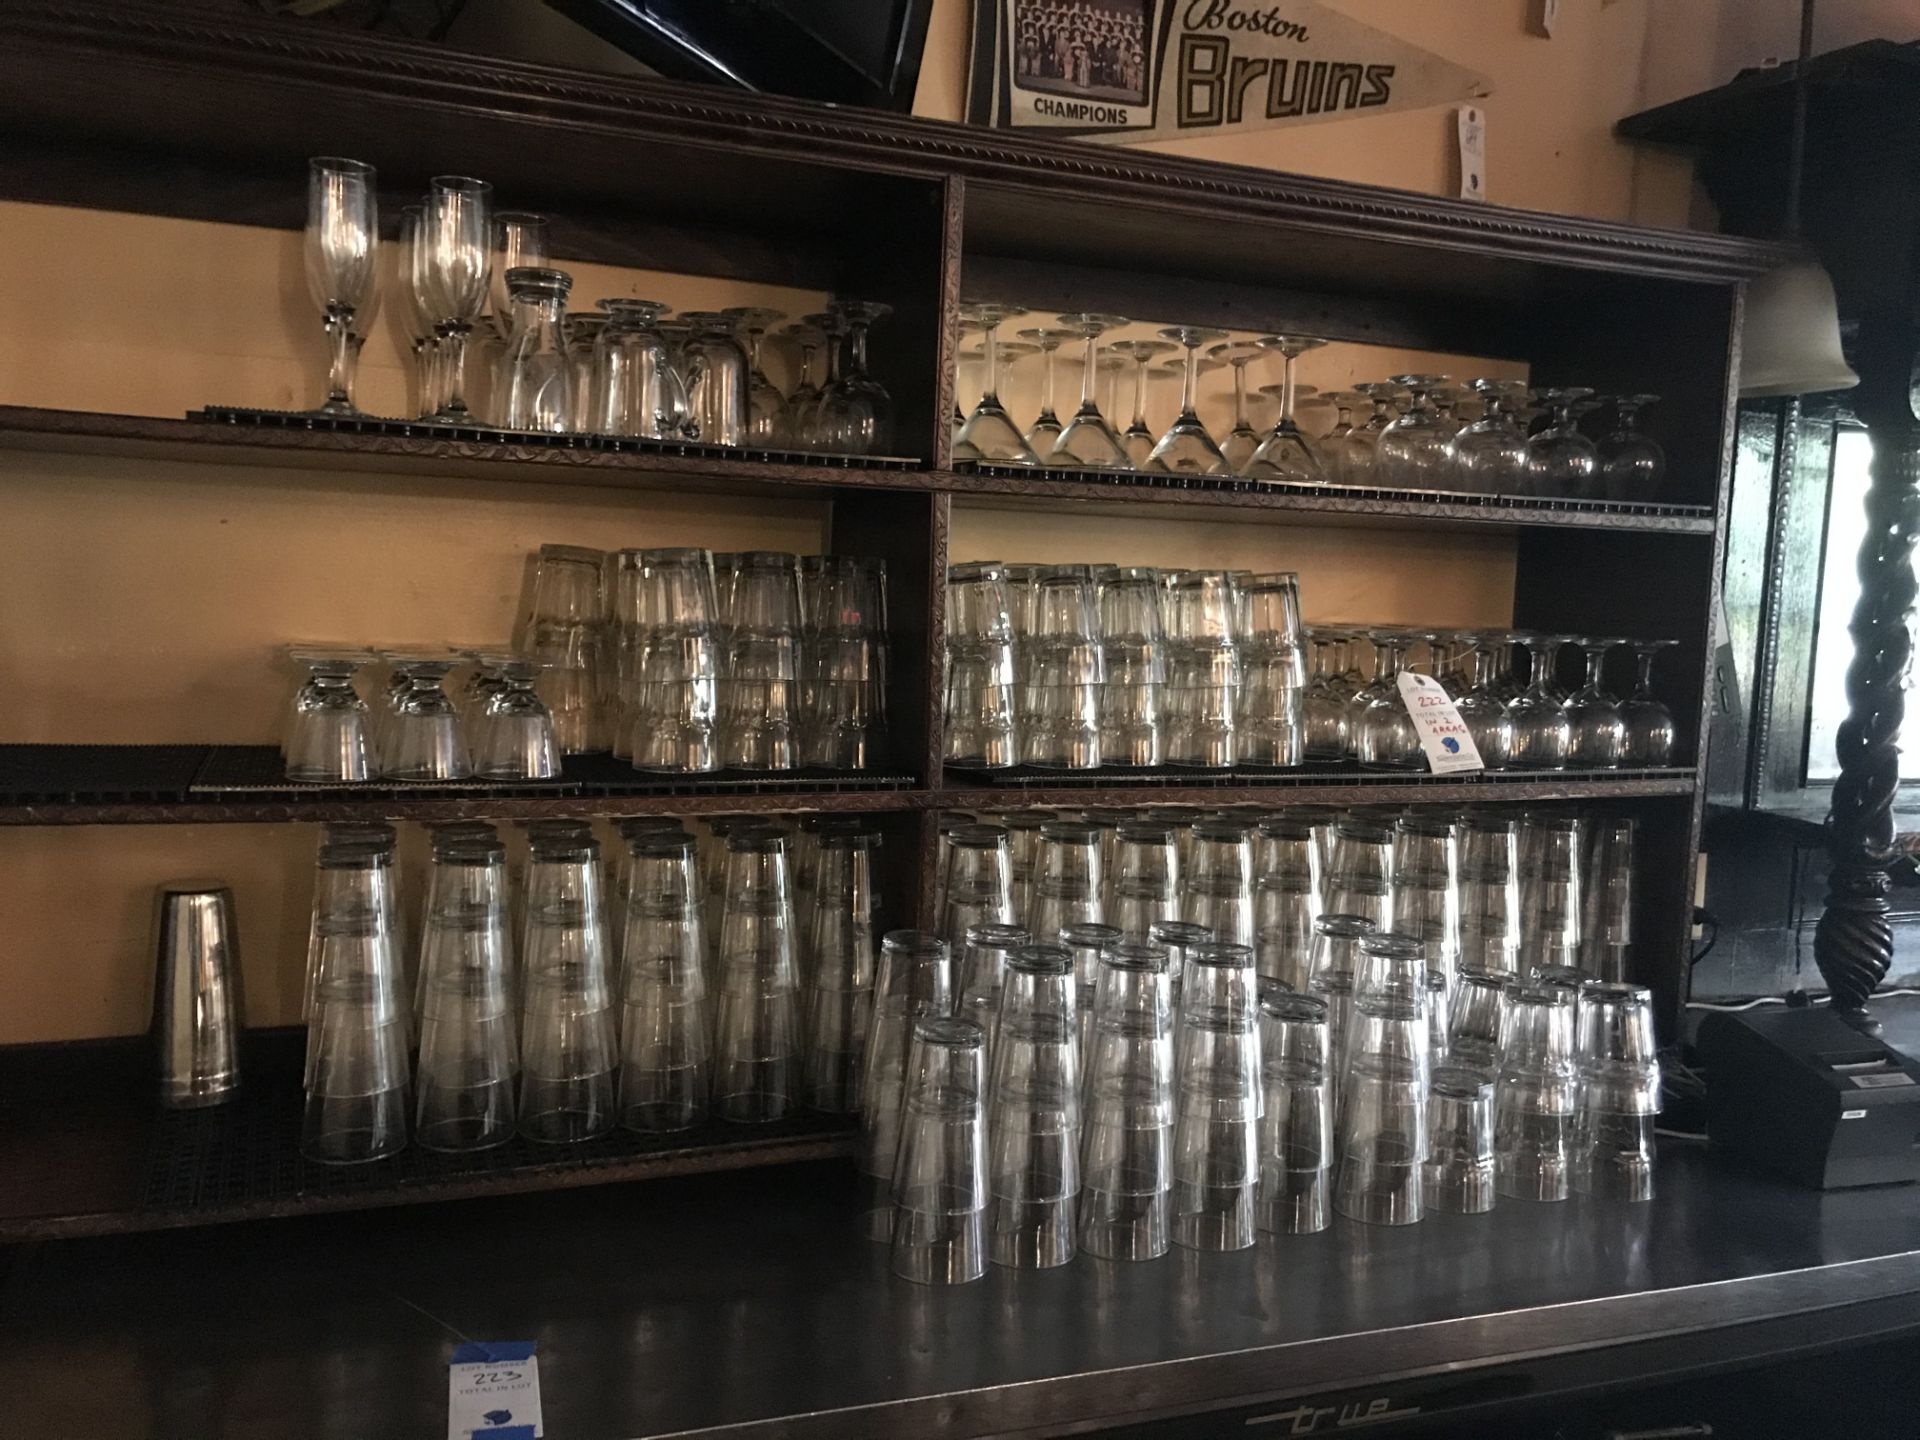 [Lot] Asst. Glassware THIS IS THE FIRST LOT UPSTAIRS(LOTS 222-301 ARE LOCATED ON THE SECOND FLOOR)